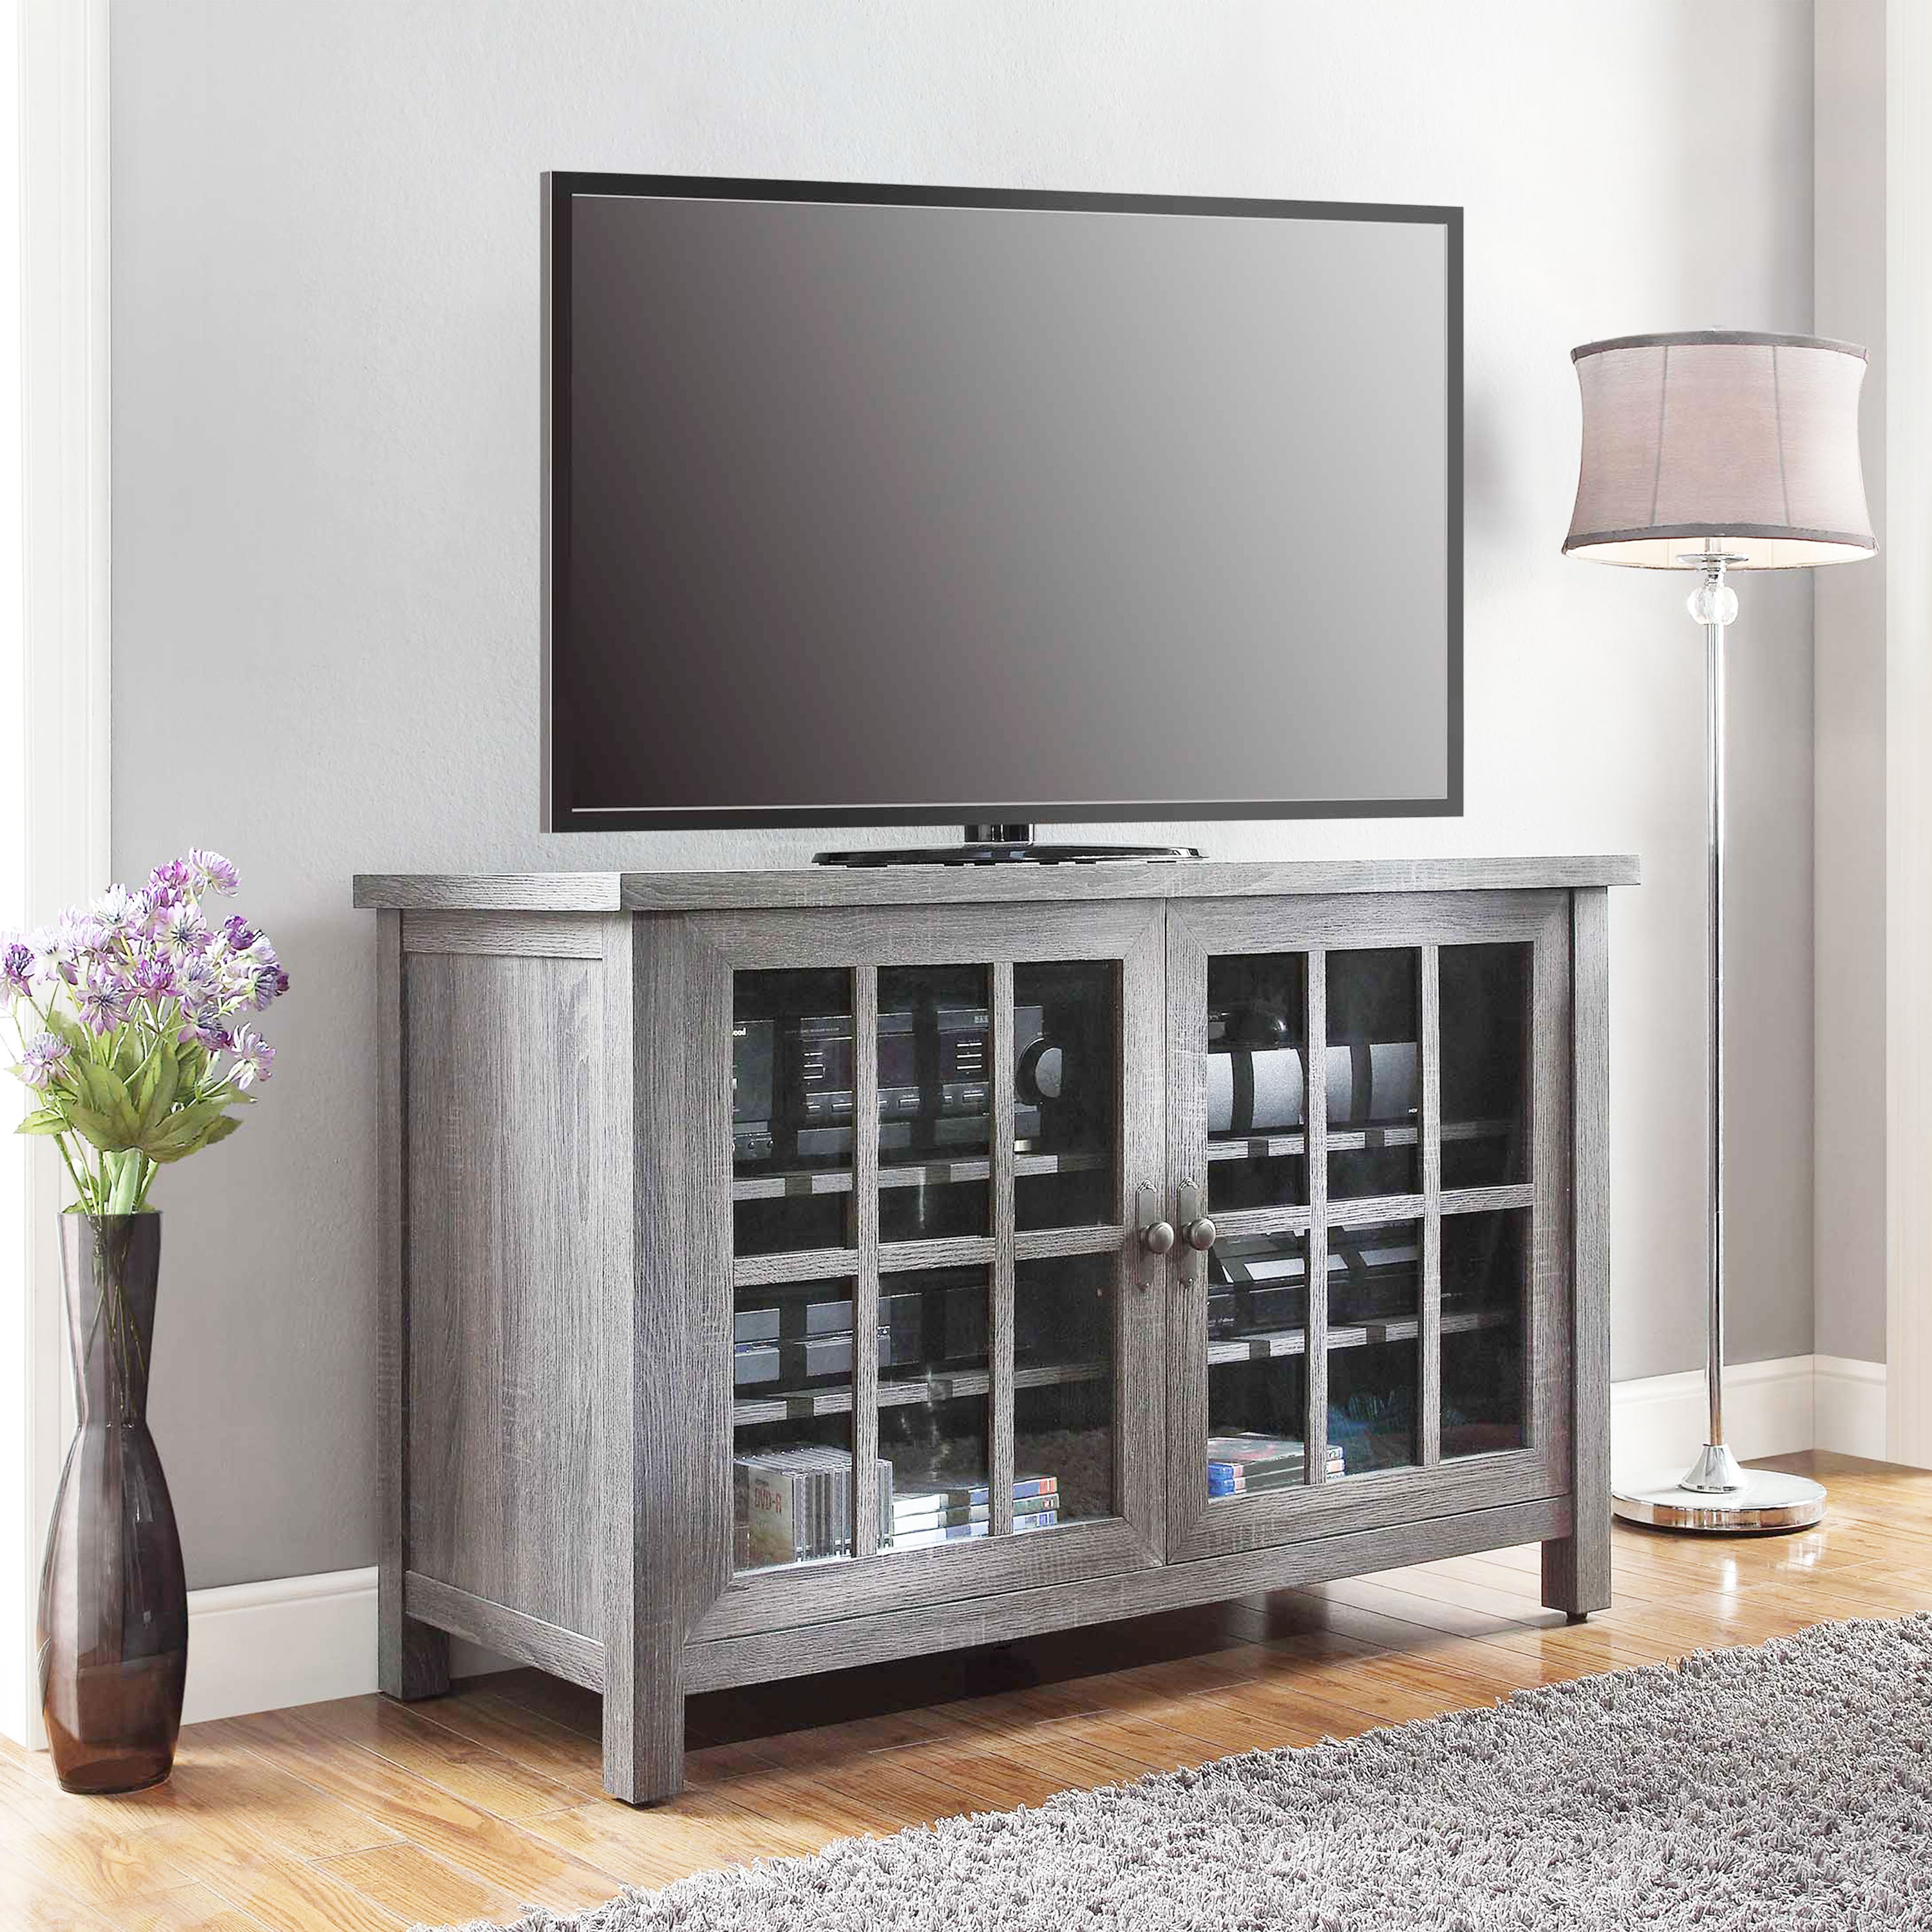 Better Homes & Gardens Oxford Square TV Stand for TVs up to 55", Gray - image 1 of 8